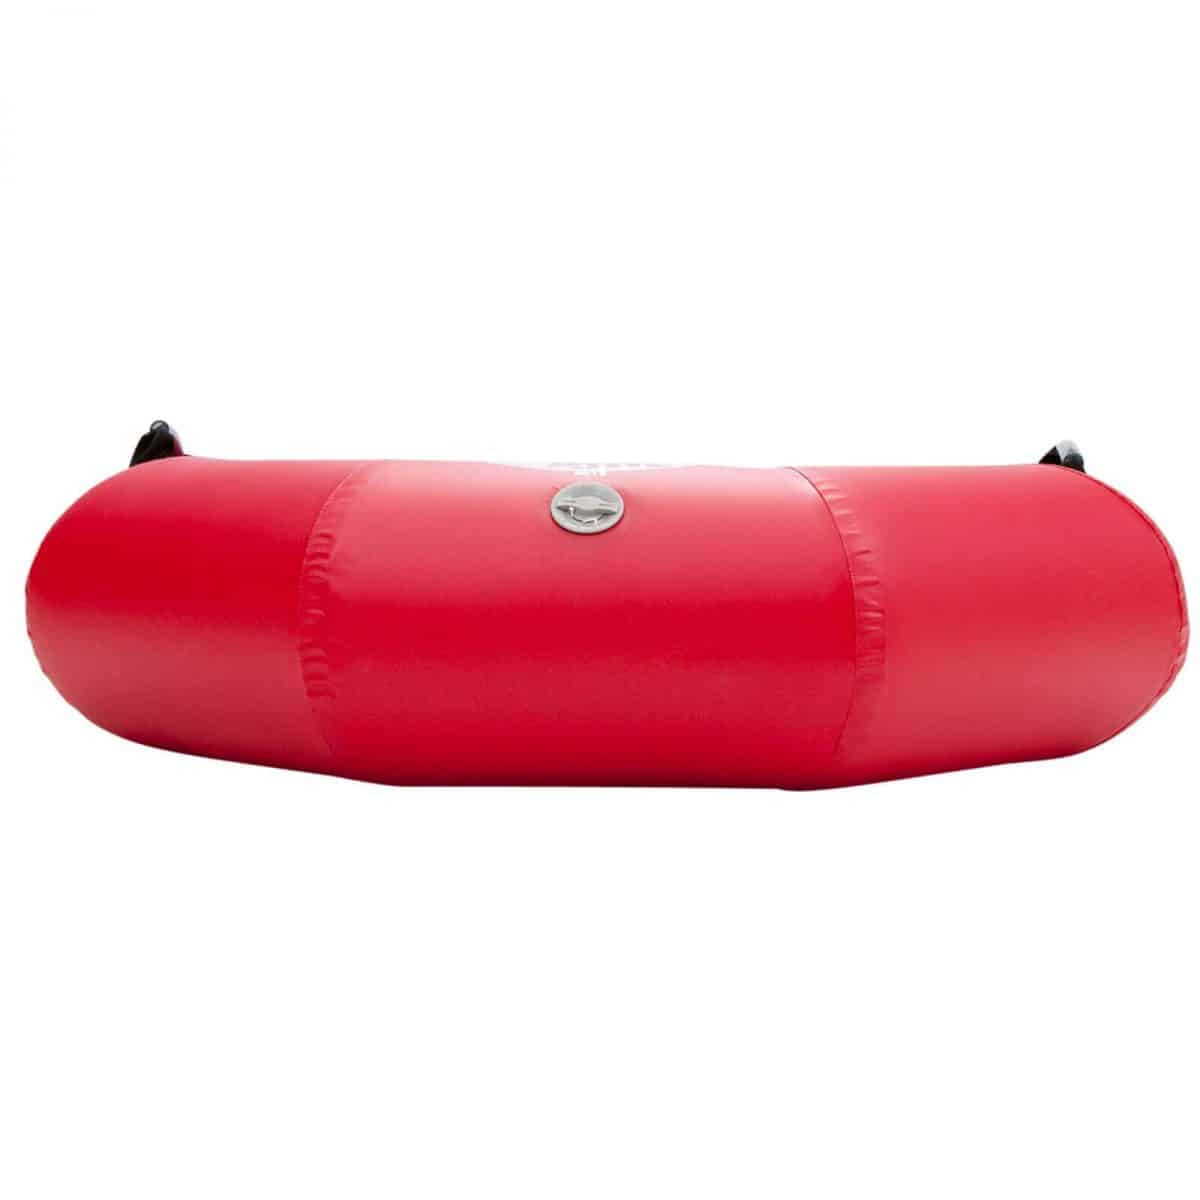 The side view of an AIRE Rocktabomb inflatable river tube in red.